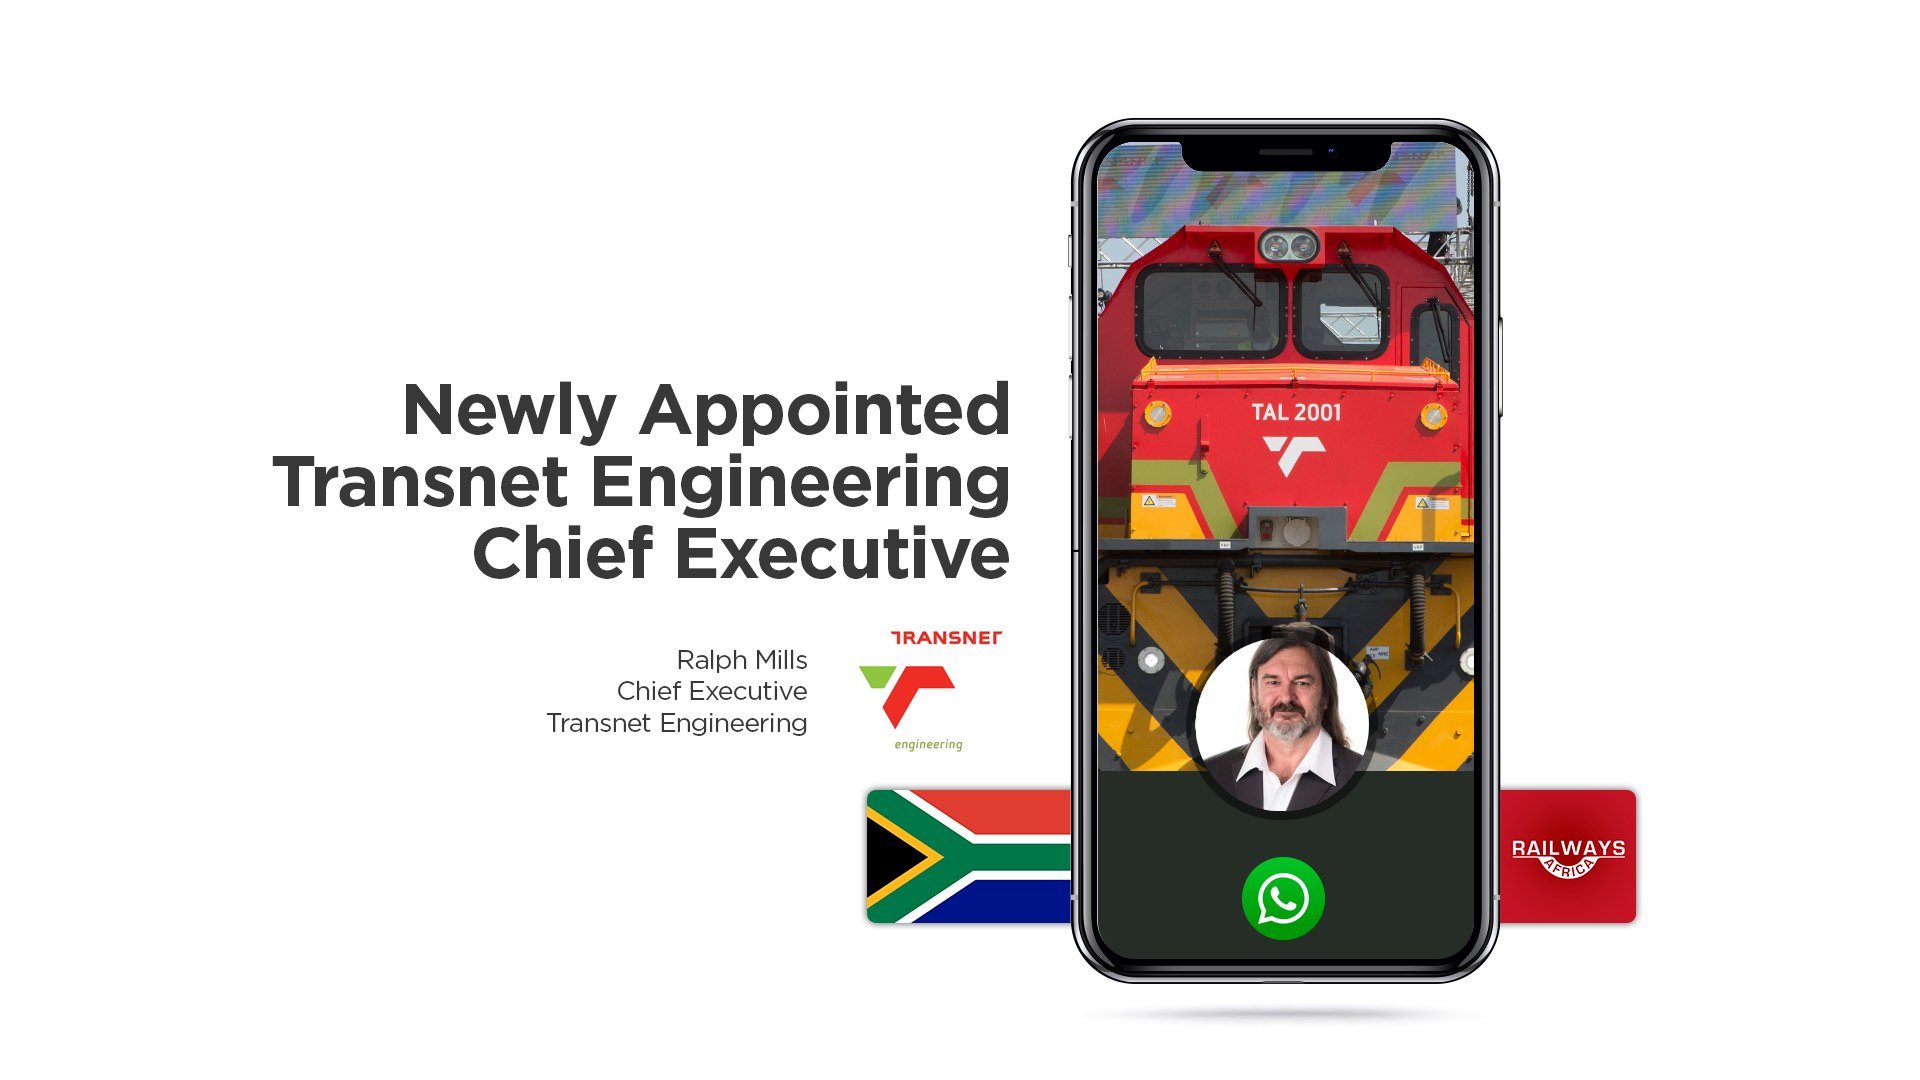 Ralph Mills, Newly Appointed Transnet Engineering CEO